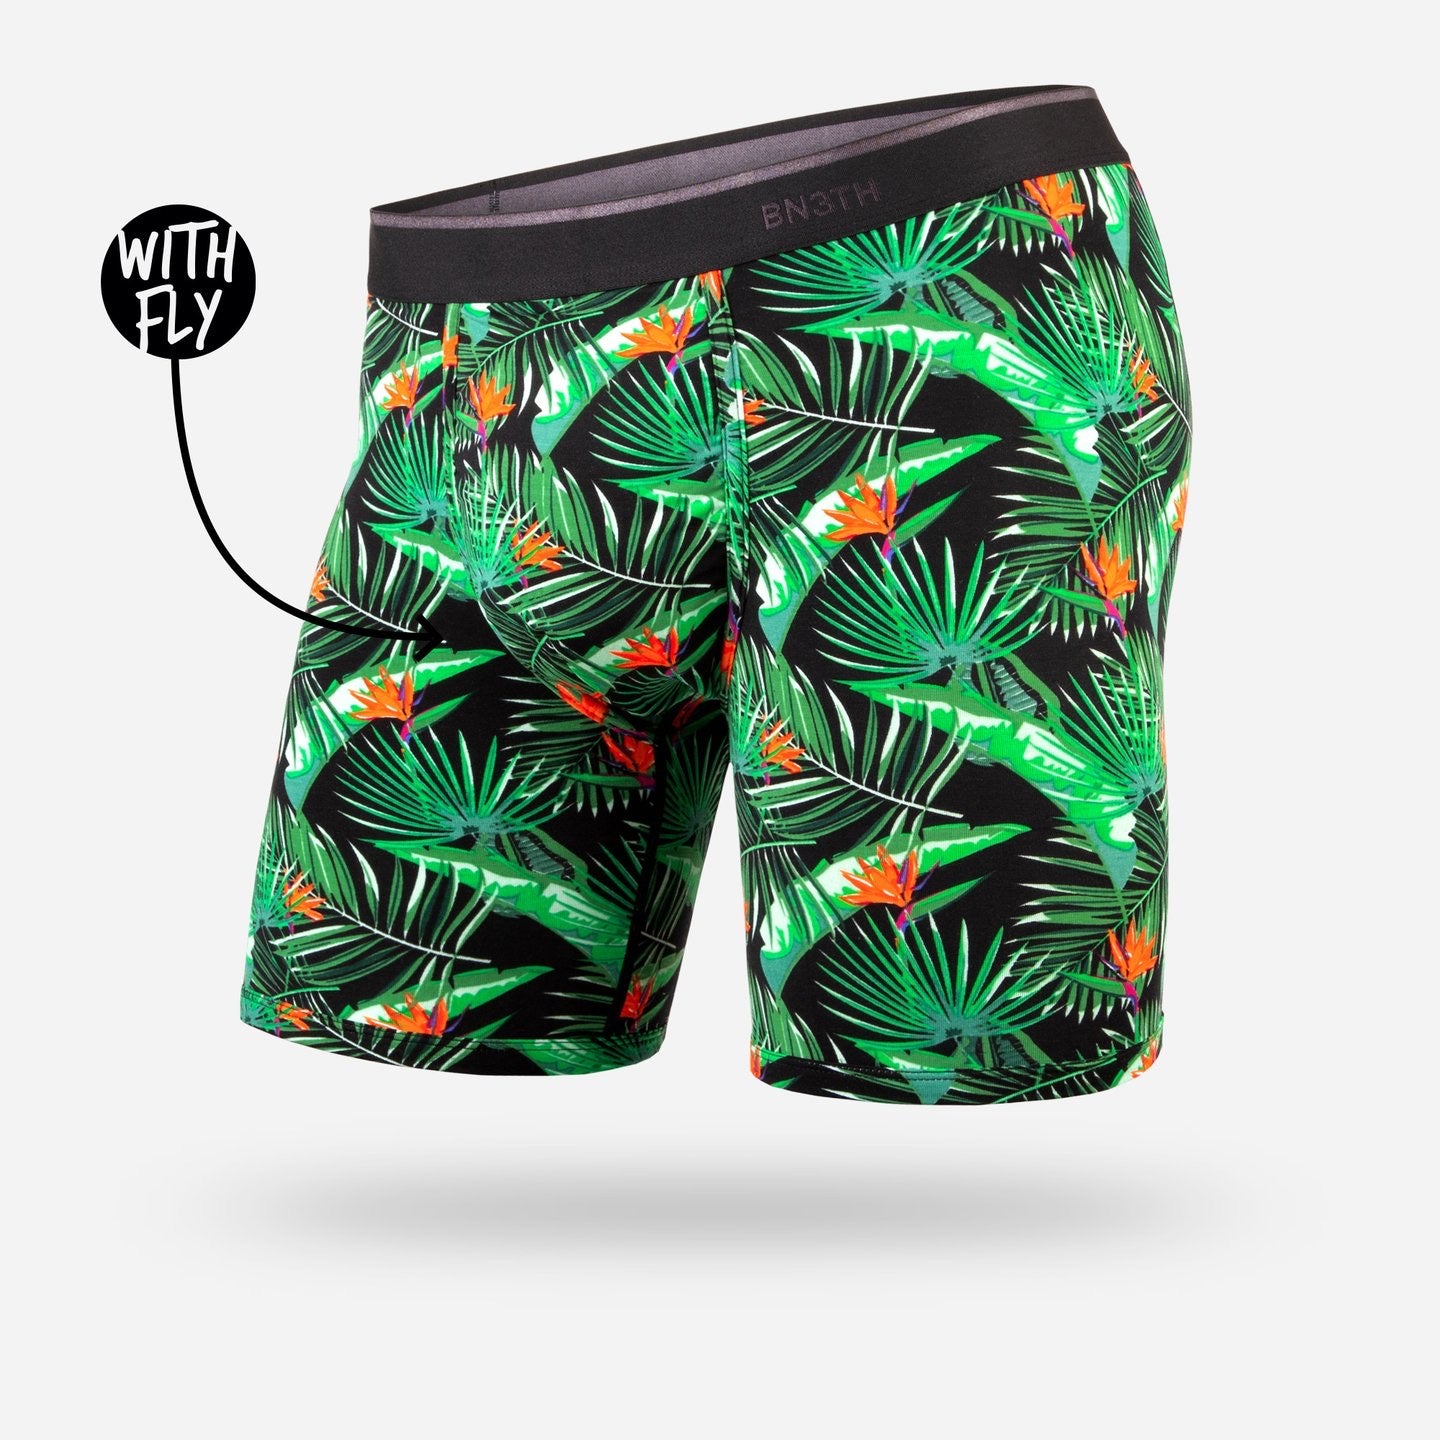 BN3TH BOXER BRIEF WITH FLY IN PARADISE BALI